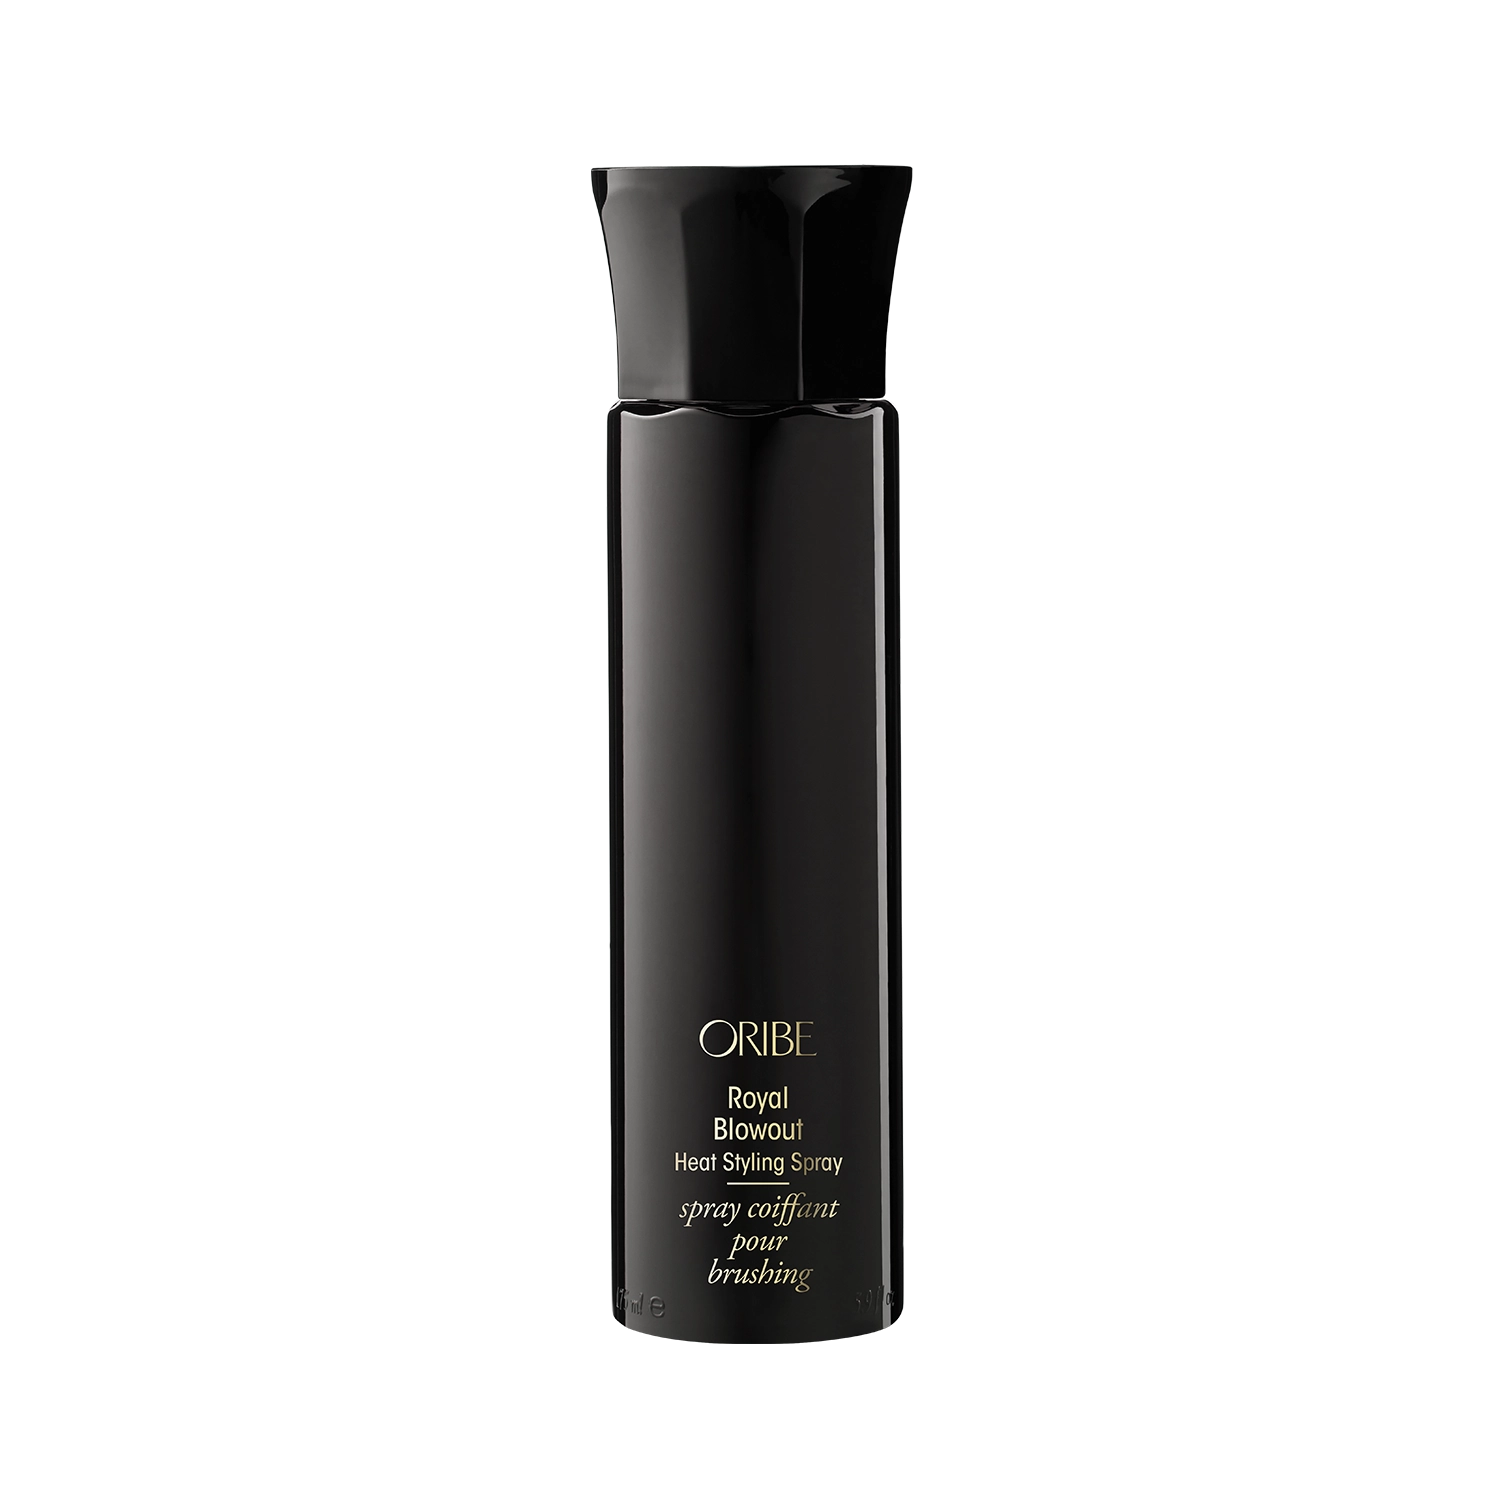 ORIBE - Spray coiffant pour brushing Royal Blowout (175ml)